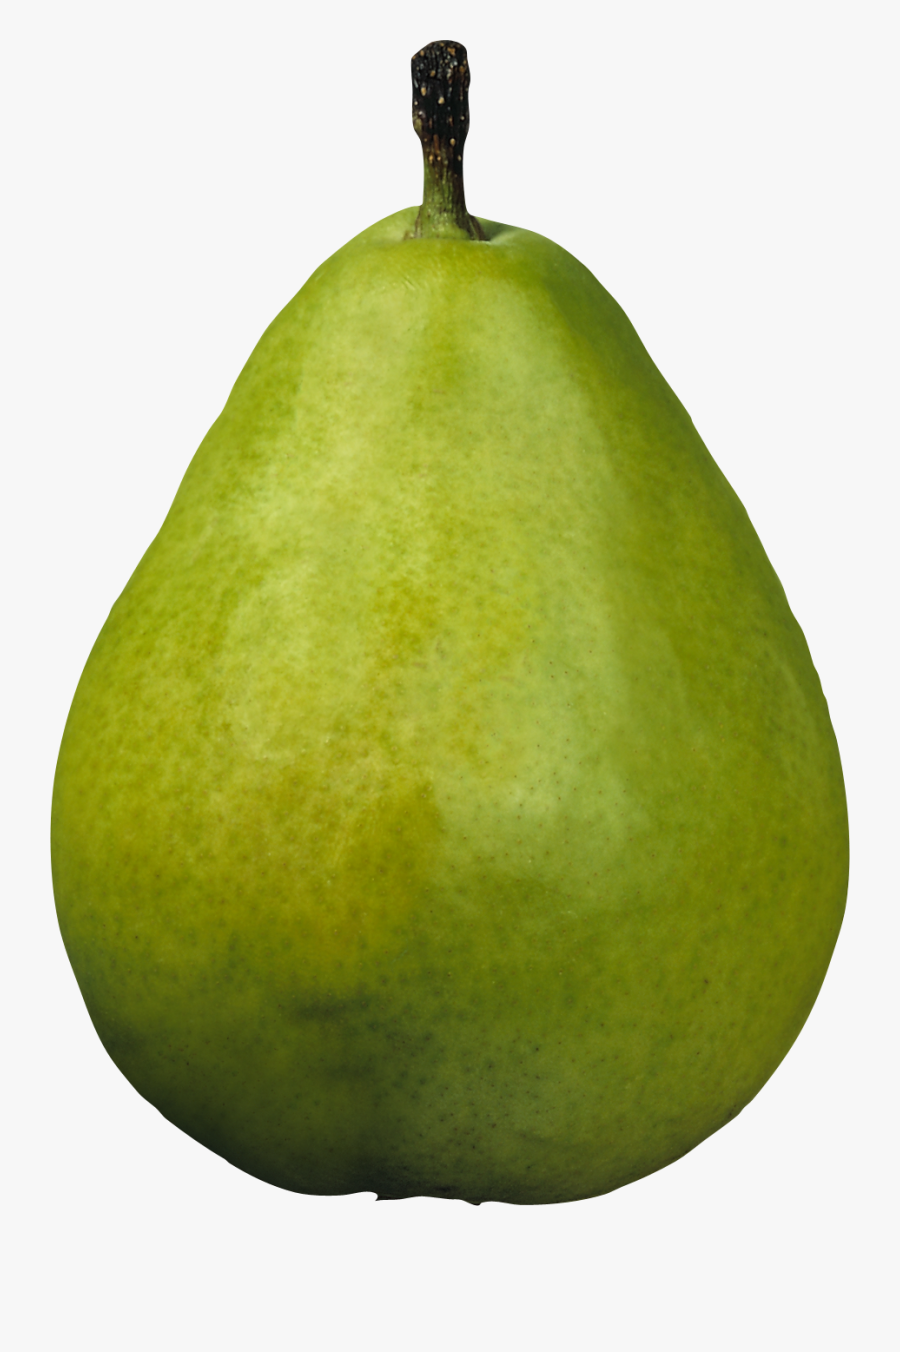 Green Pear Png Image - Pear Transparent Background, Transparent Clipart